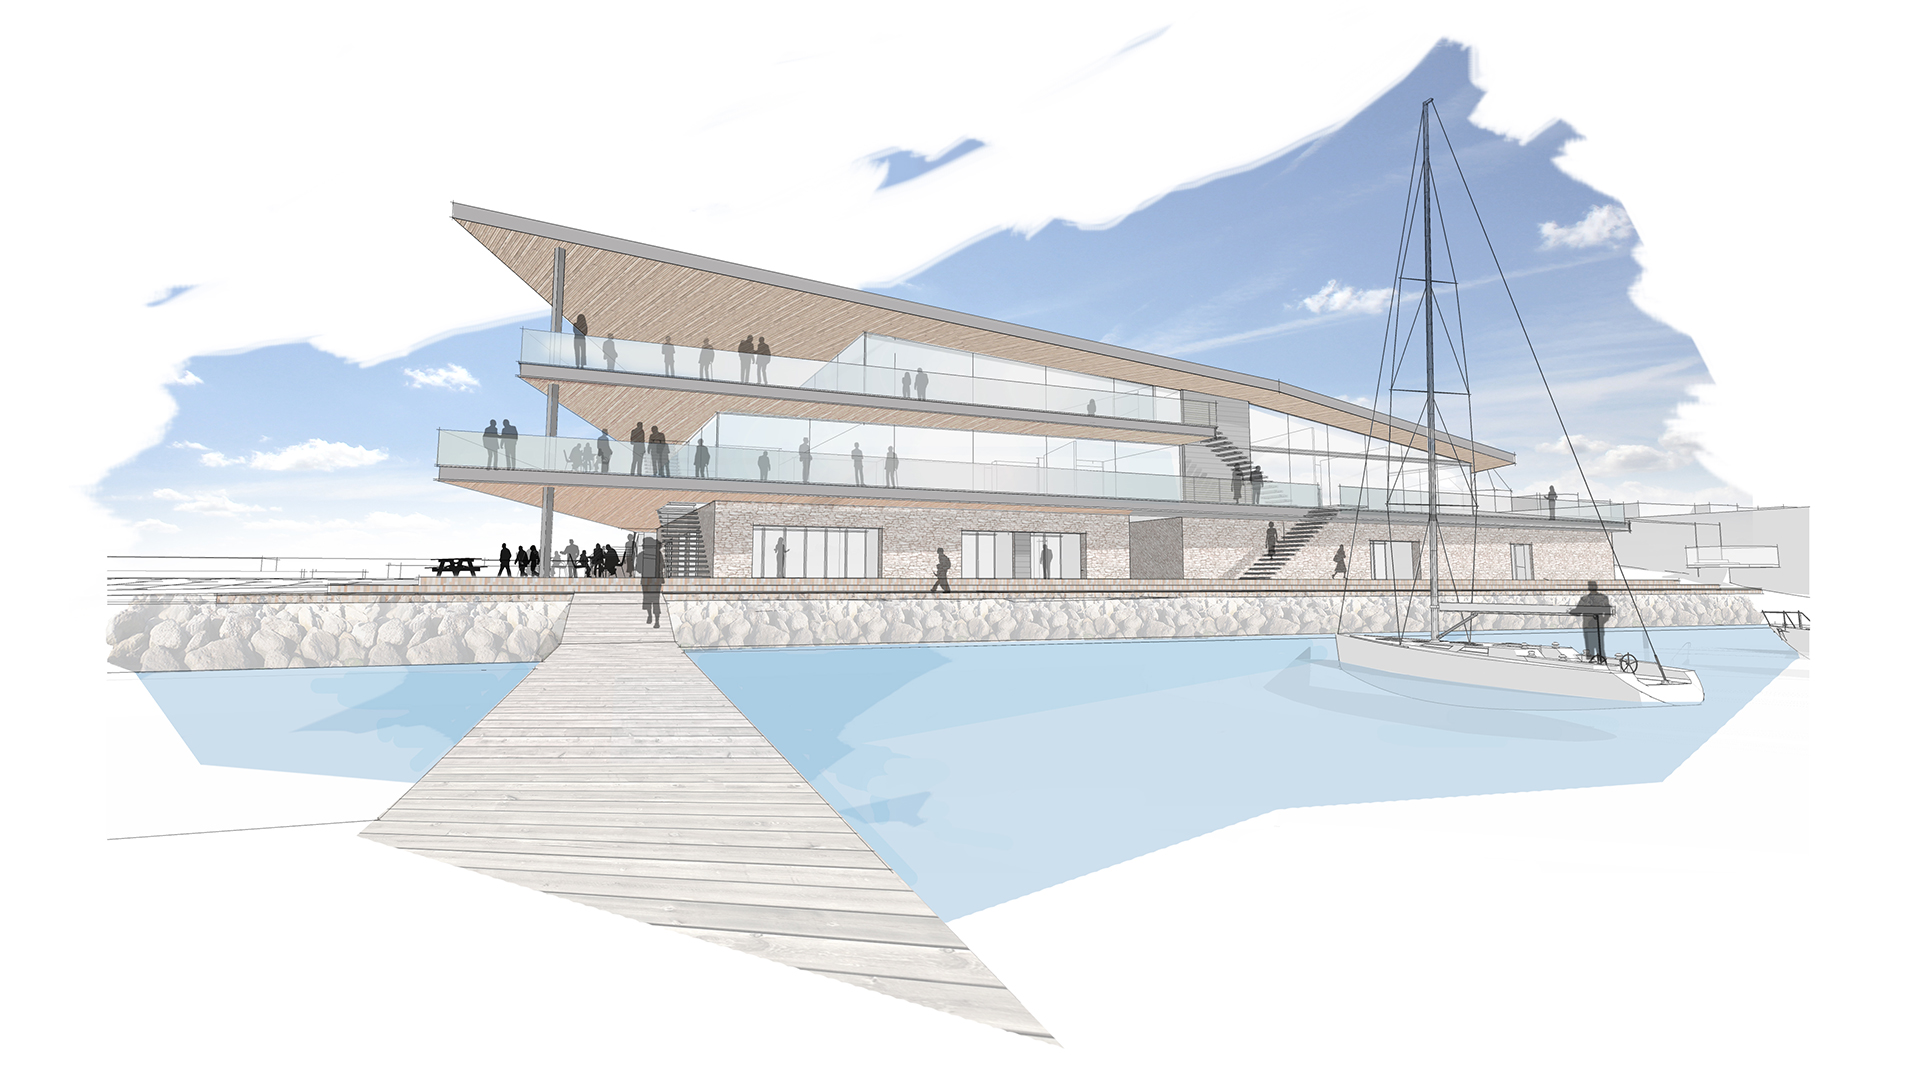 concept view of Poole yacht club from jetty